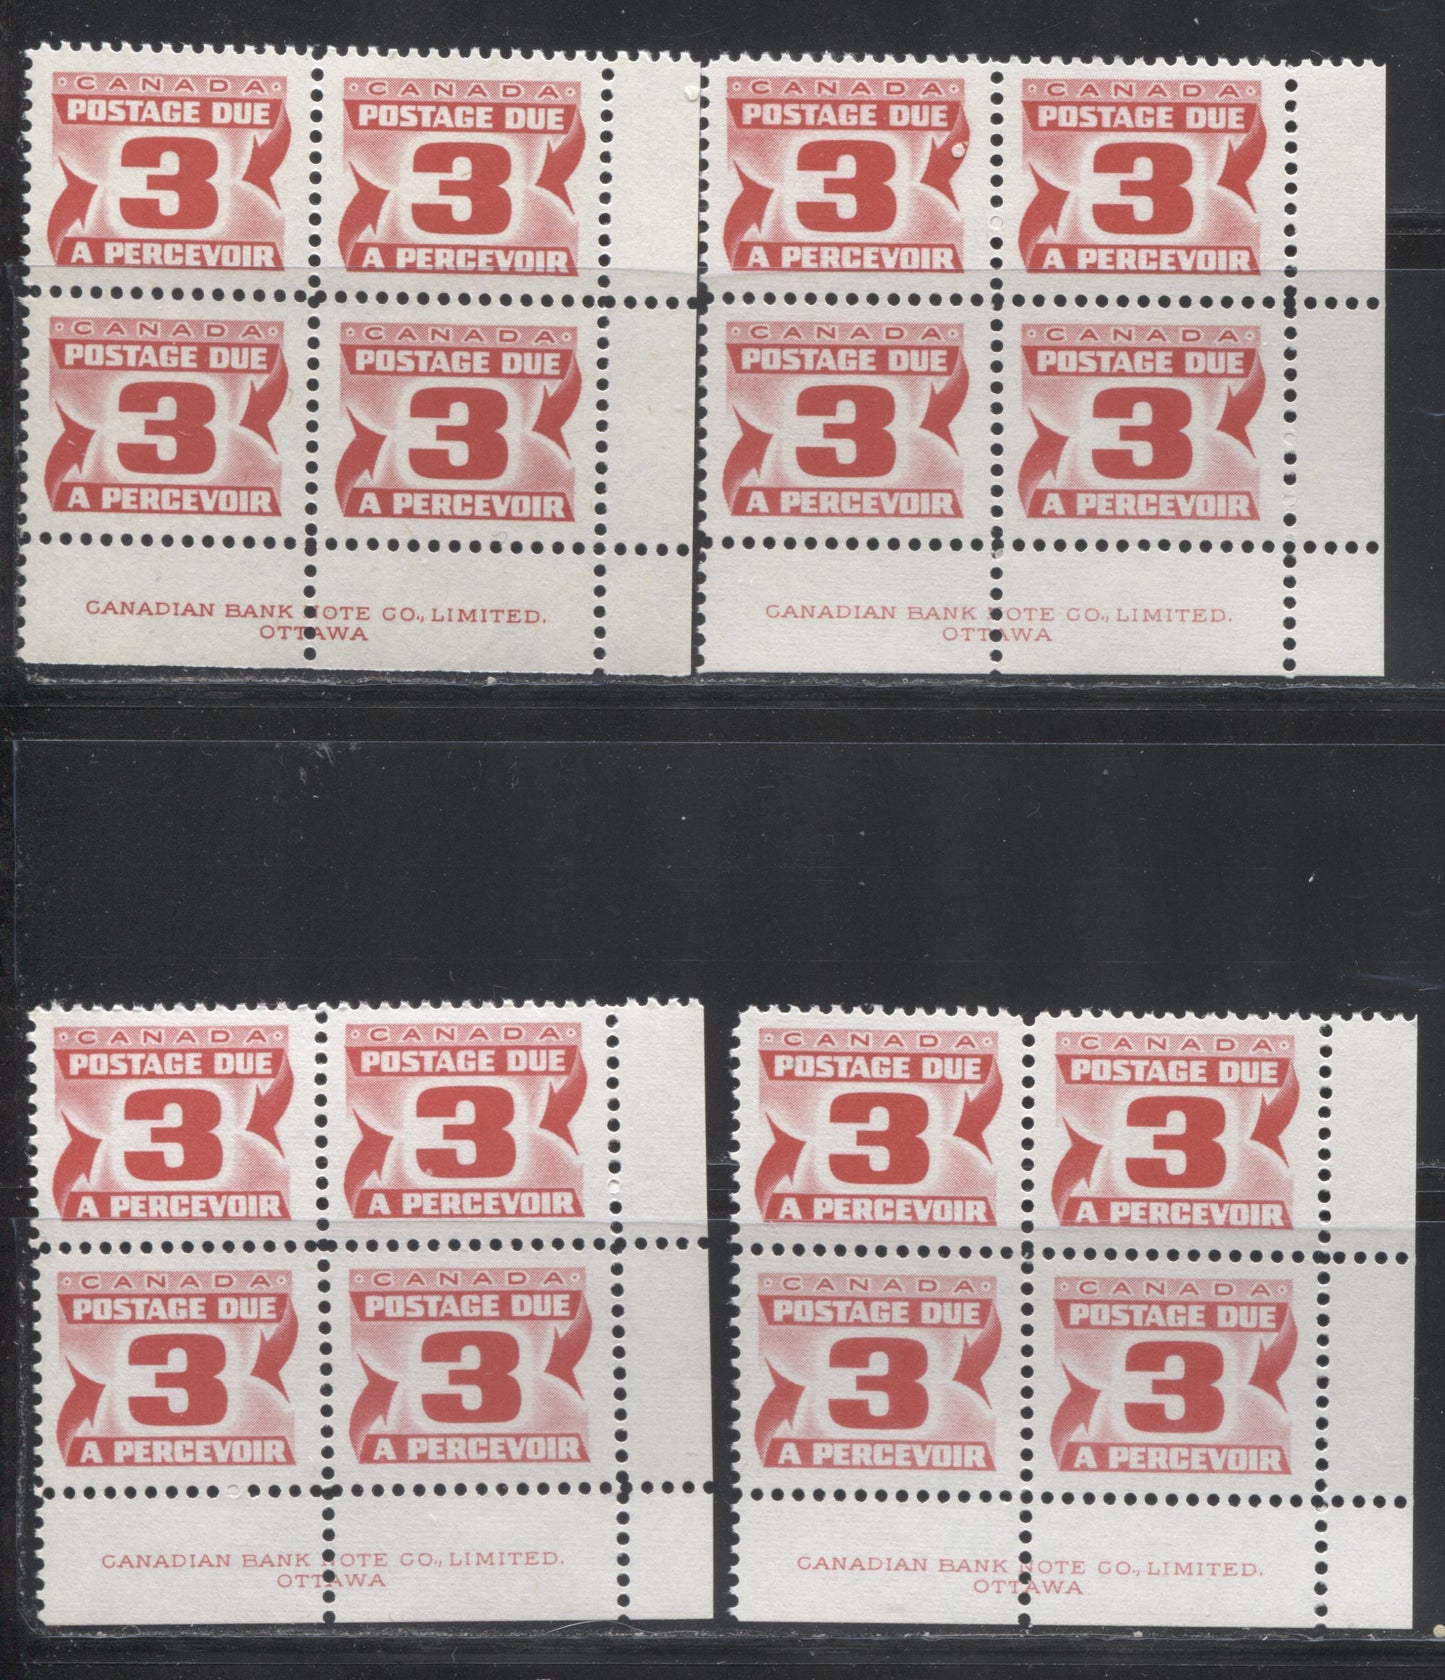 Lot 81 Canada #J30 3c Carmine Rose 1973-1977, 3rd Centennial Postage Due Issue, Four VFNH LR Inscription Blocks Of 4 On DF Ivory Smooth & Ribbed, Bluish Ribbed & Bluish White Ribbed Papers With PVA Gum, Perf 12